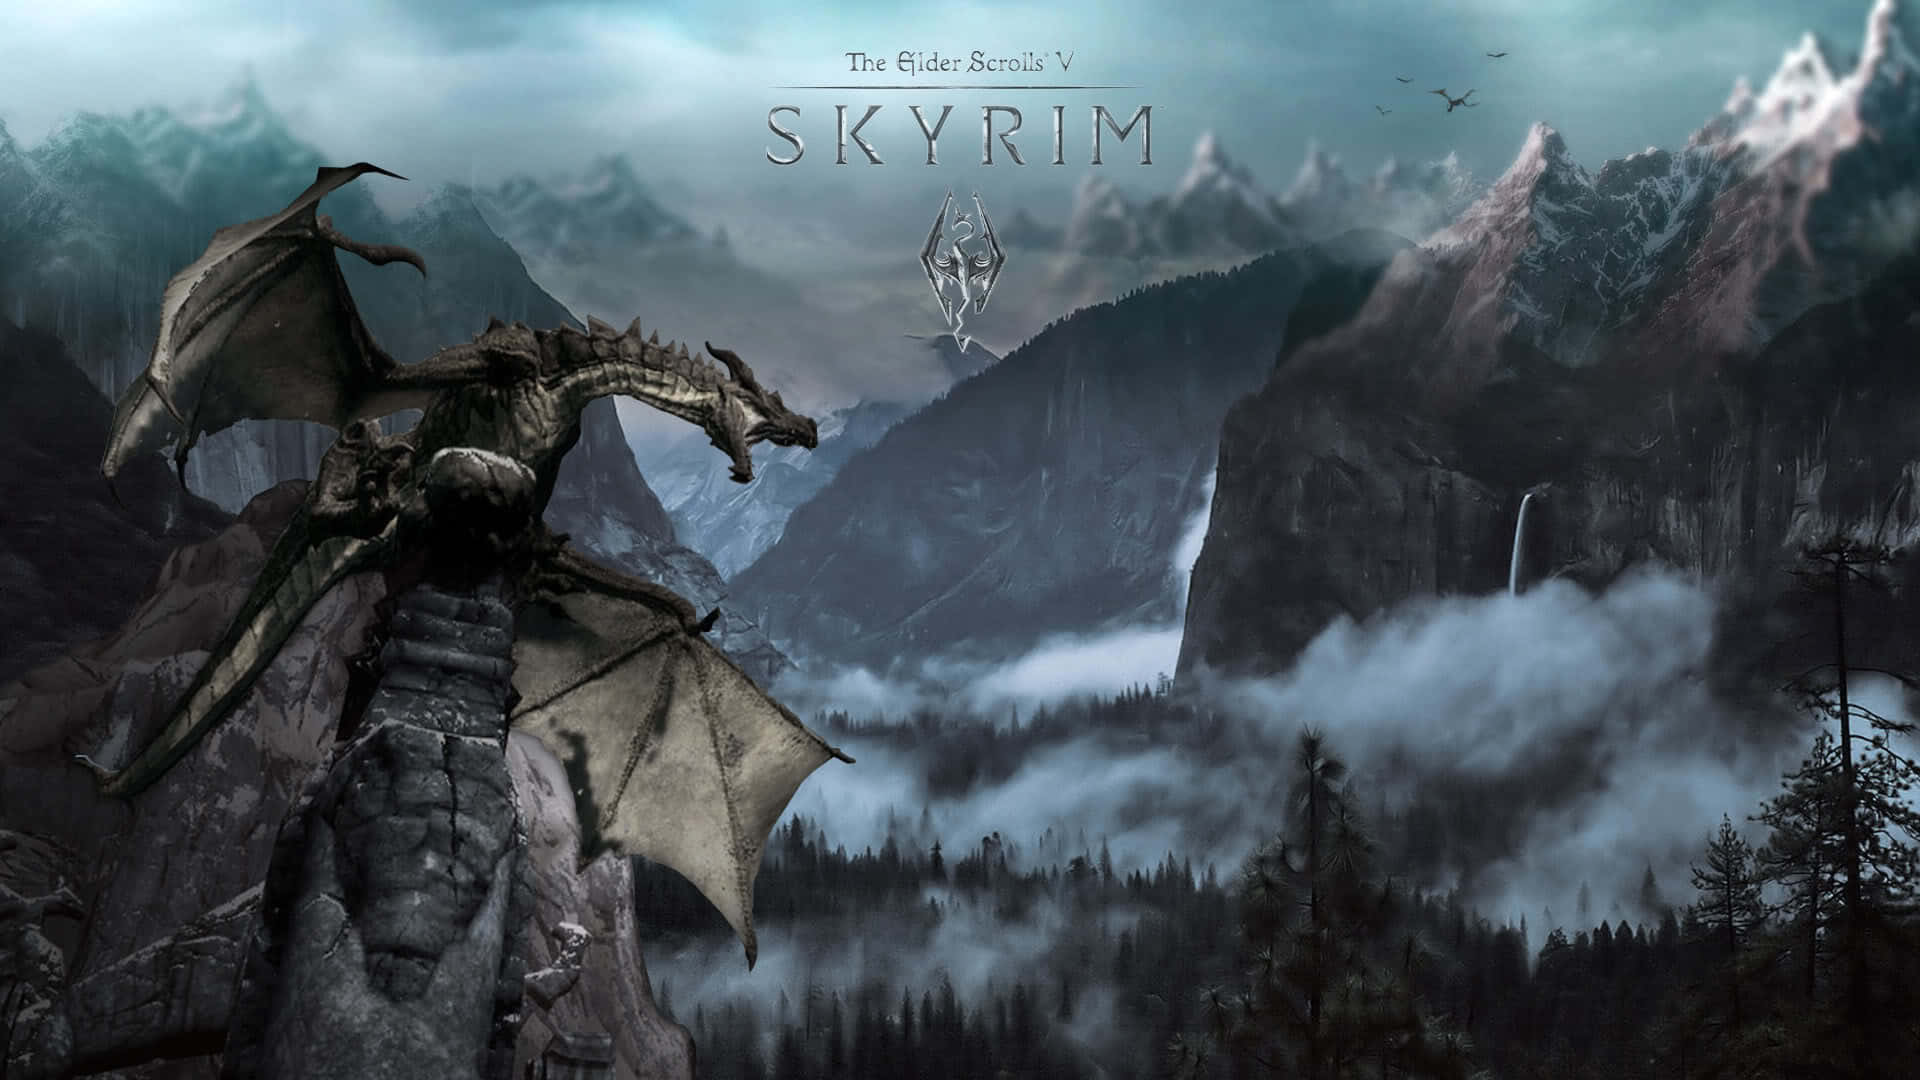 The Dragonborn faces a daunting journey in the majestic world of Skyrim